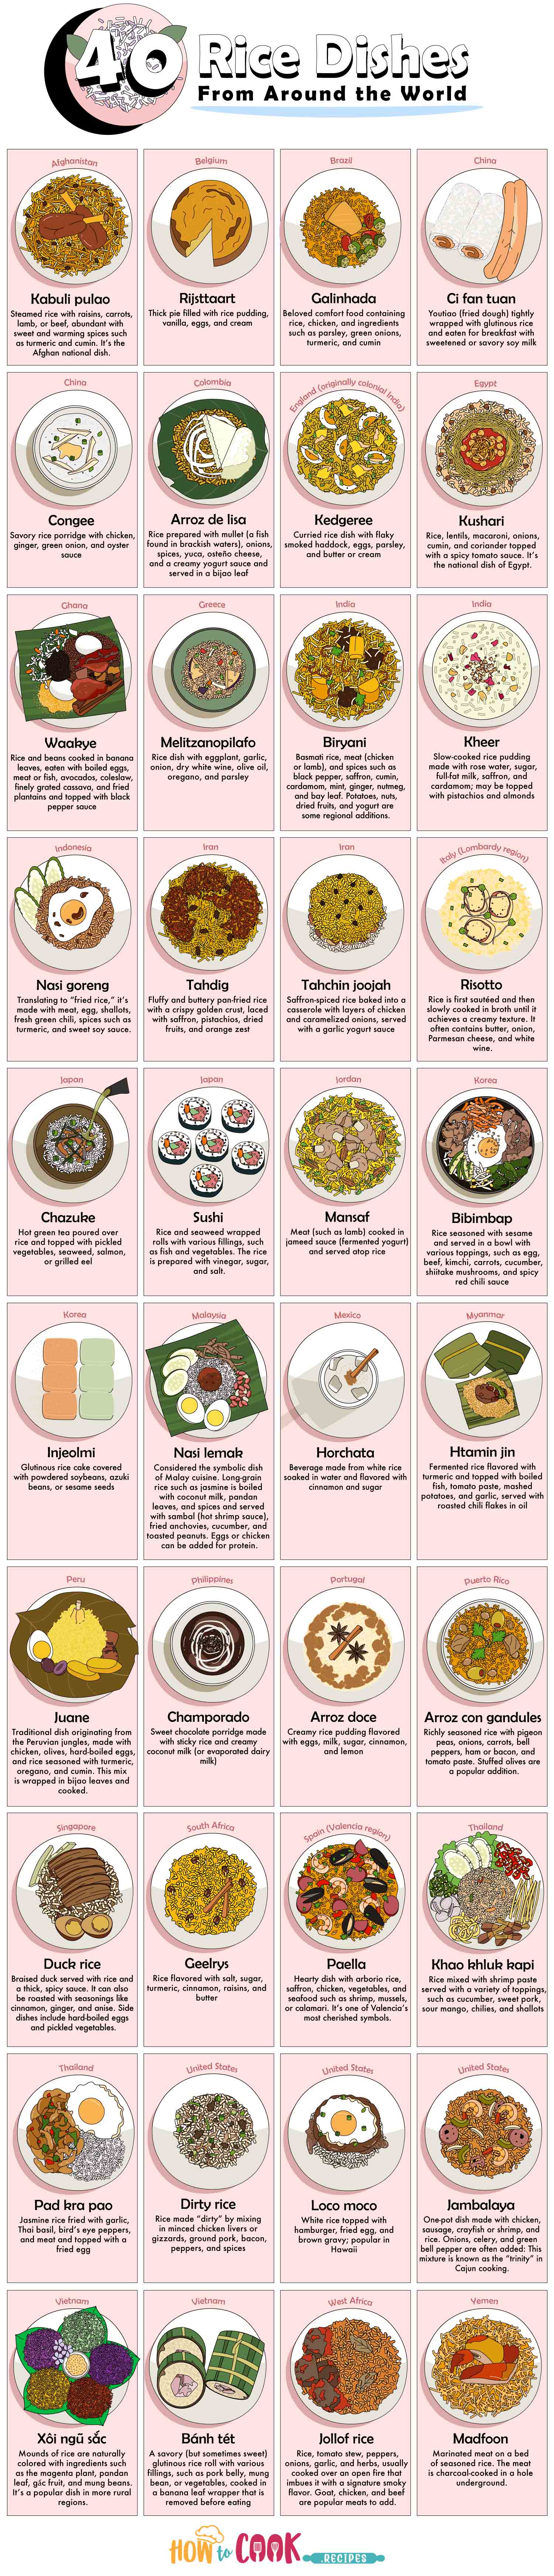 40 Rice Dishes From Around the World